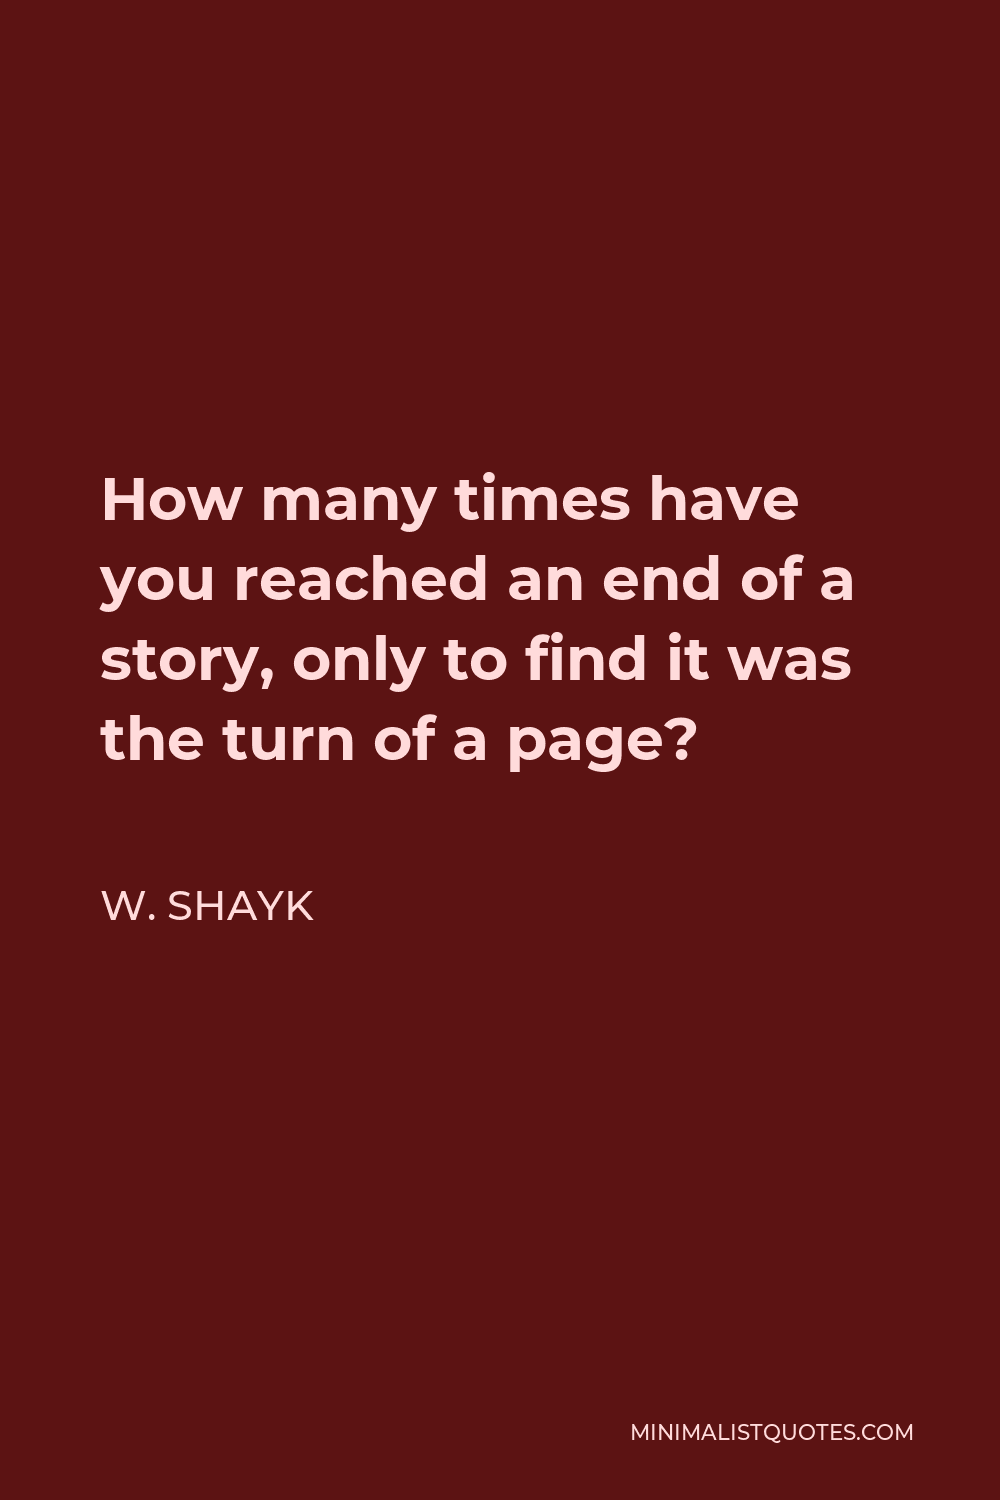 W. Shayk Quote - How many times have you reached an end of a story, only to find it was the turn of a page?